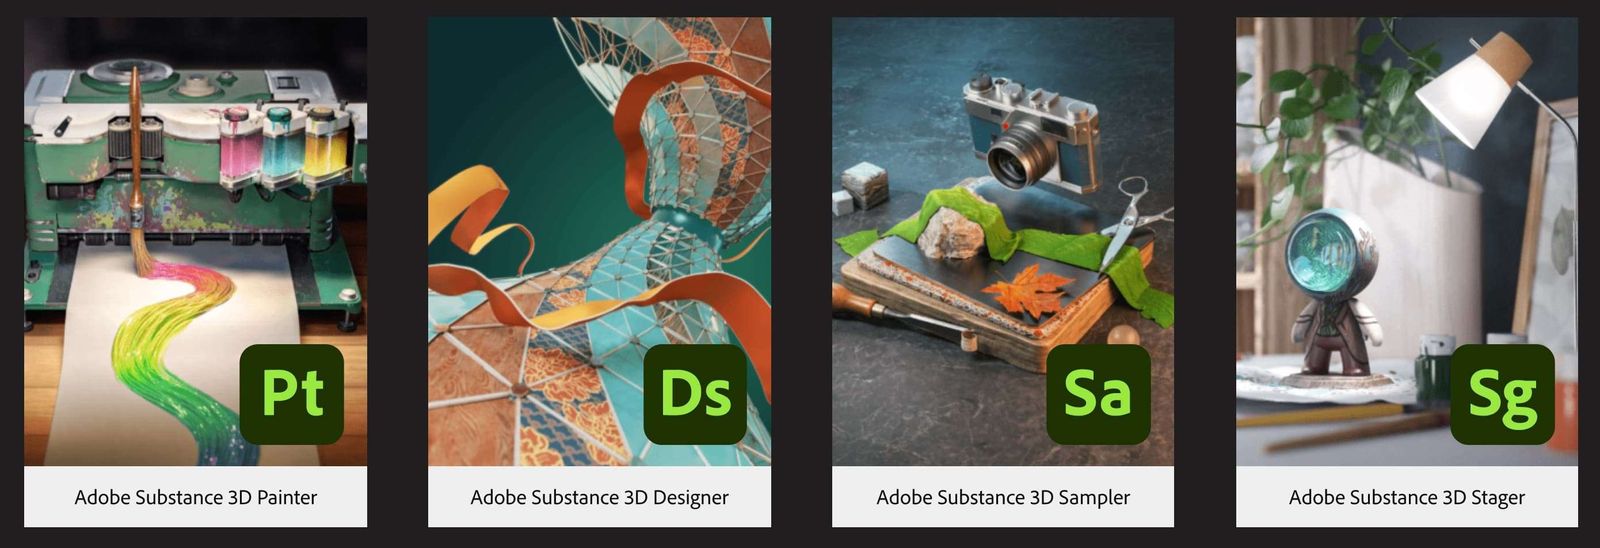 download the new version for android Adobe Substance 3D Stager 2.1.0.5587